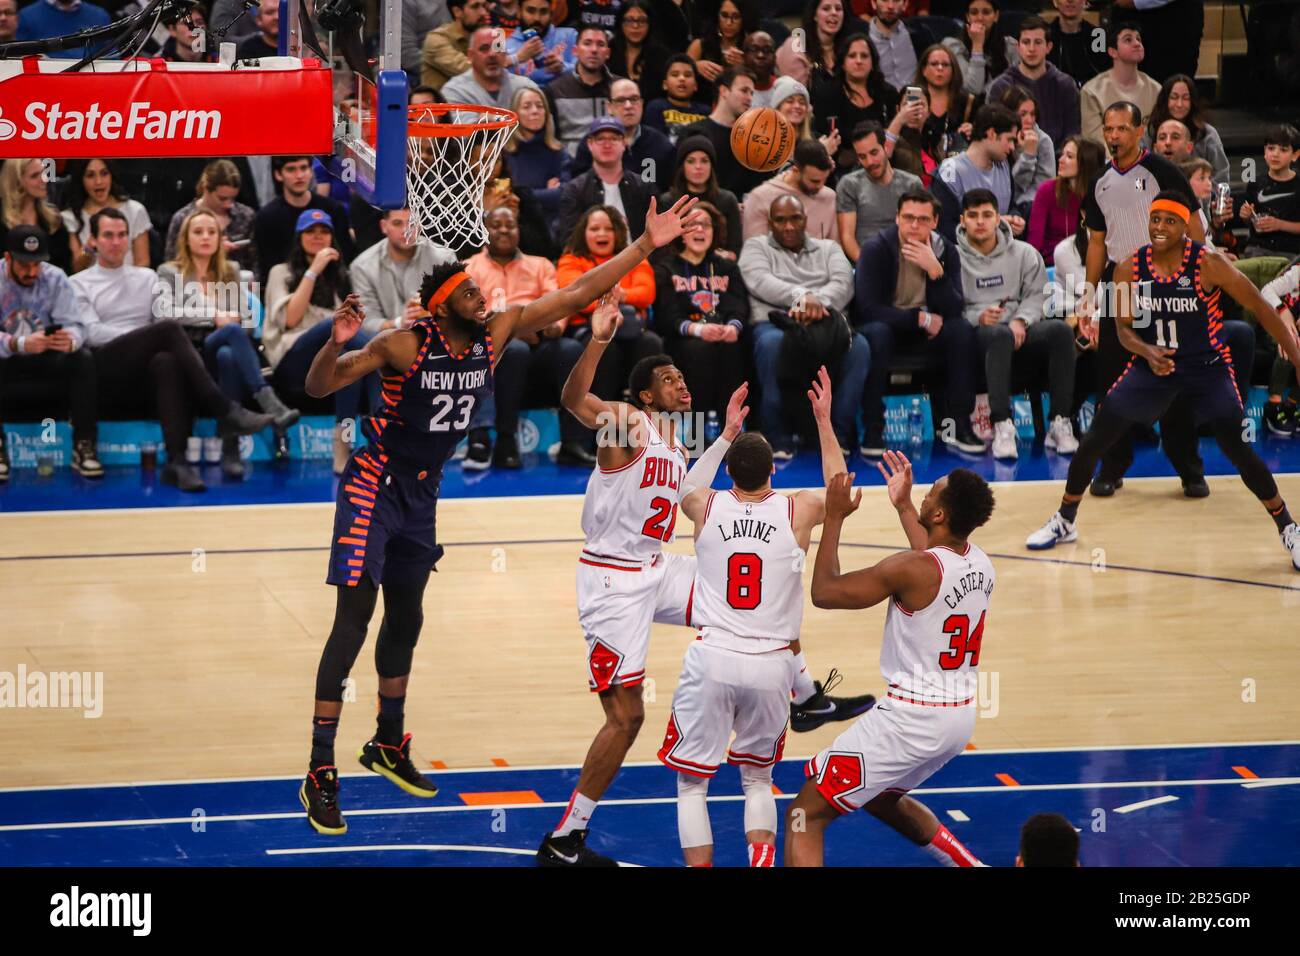 New York, USA. 29th Feb, 2020. Match NBA basketball between New York Knicks  and Chicago Bulls at Madison Square Garden in New York City on Saturday.  Credit: Vanessa Carvalho/ZUMA Wire/Alamy Live News